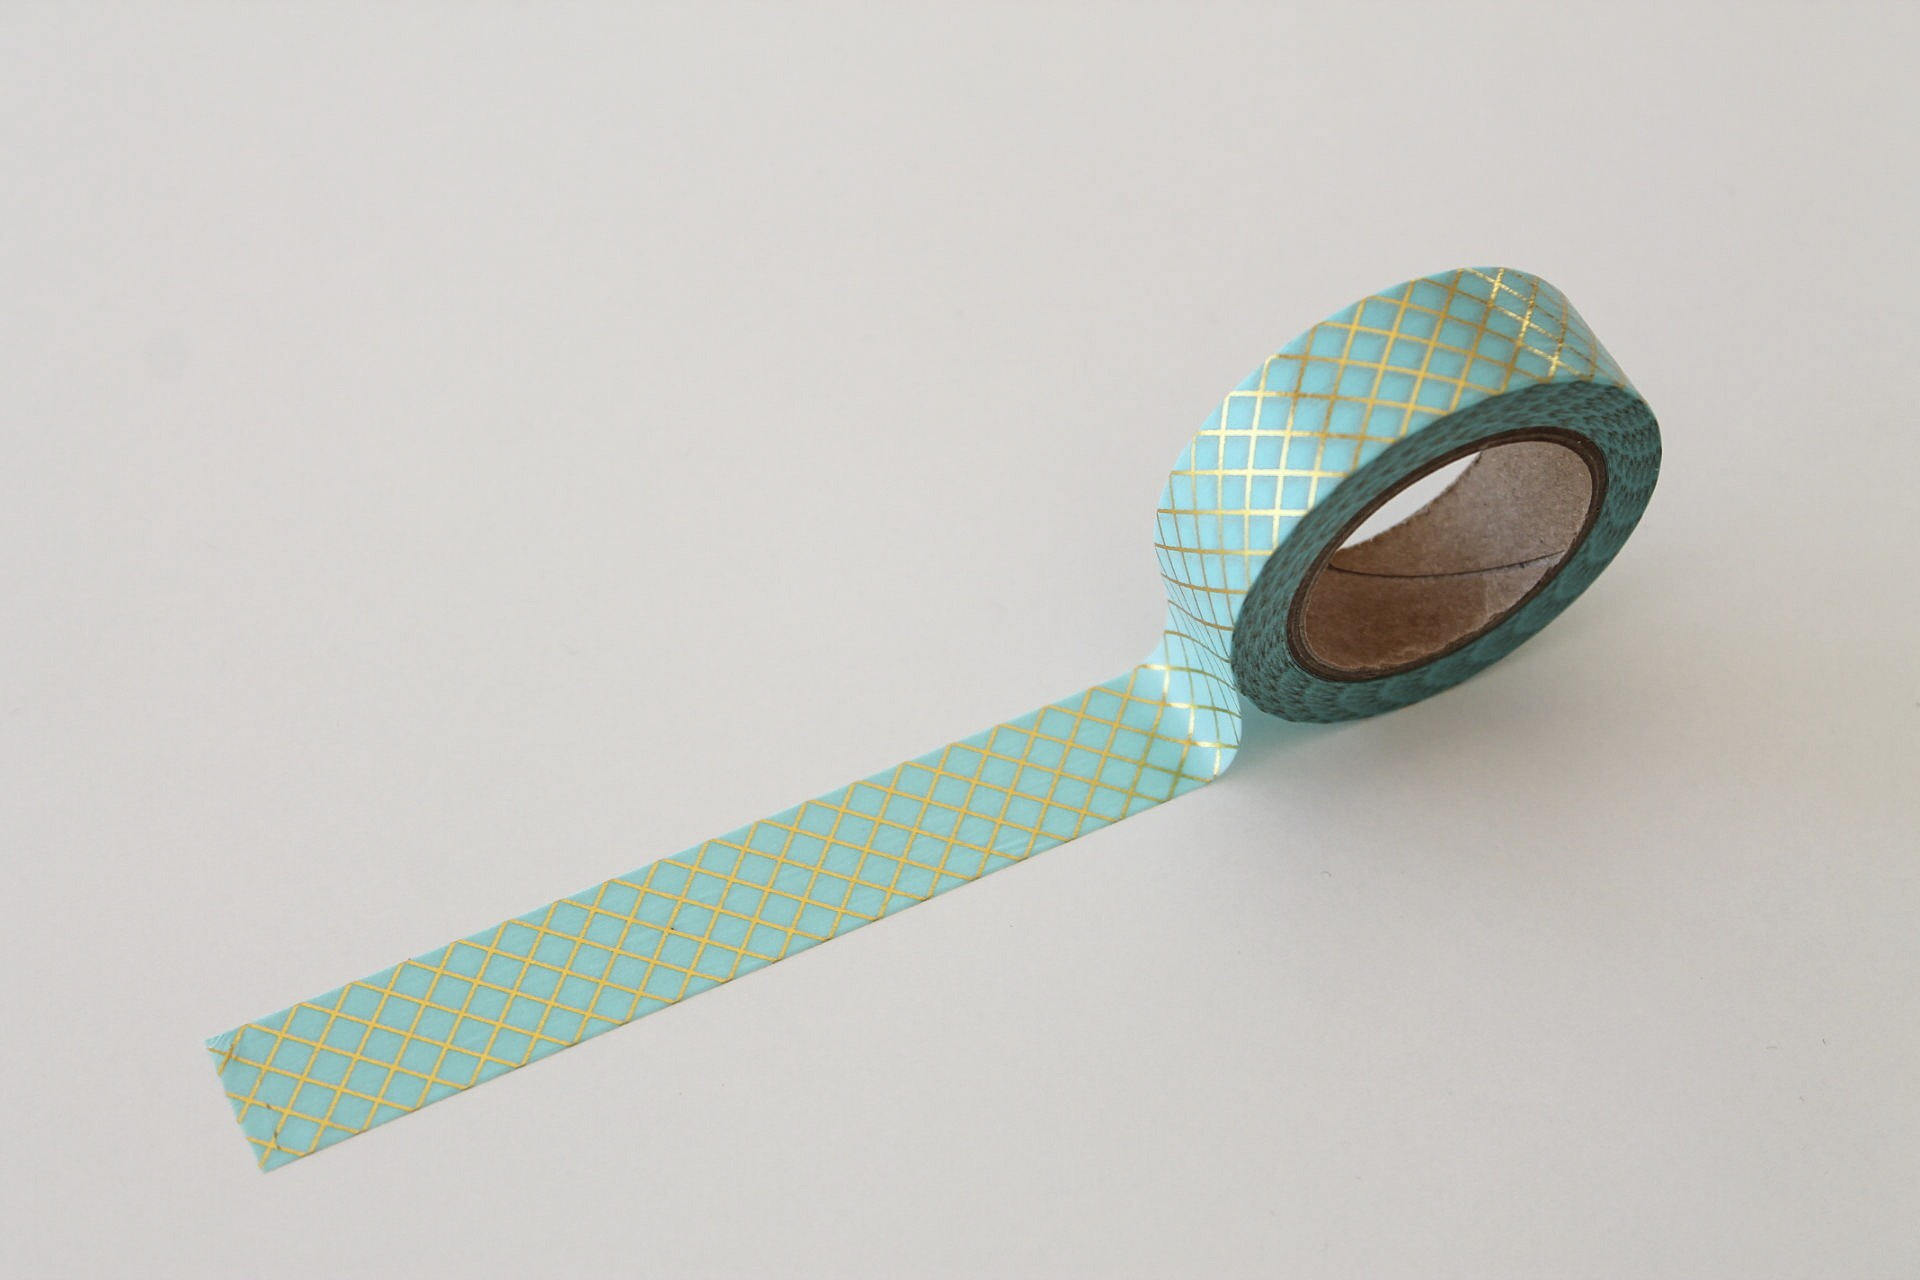 Gold Foil Washi Tape - Kness